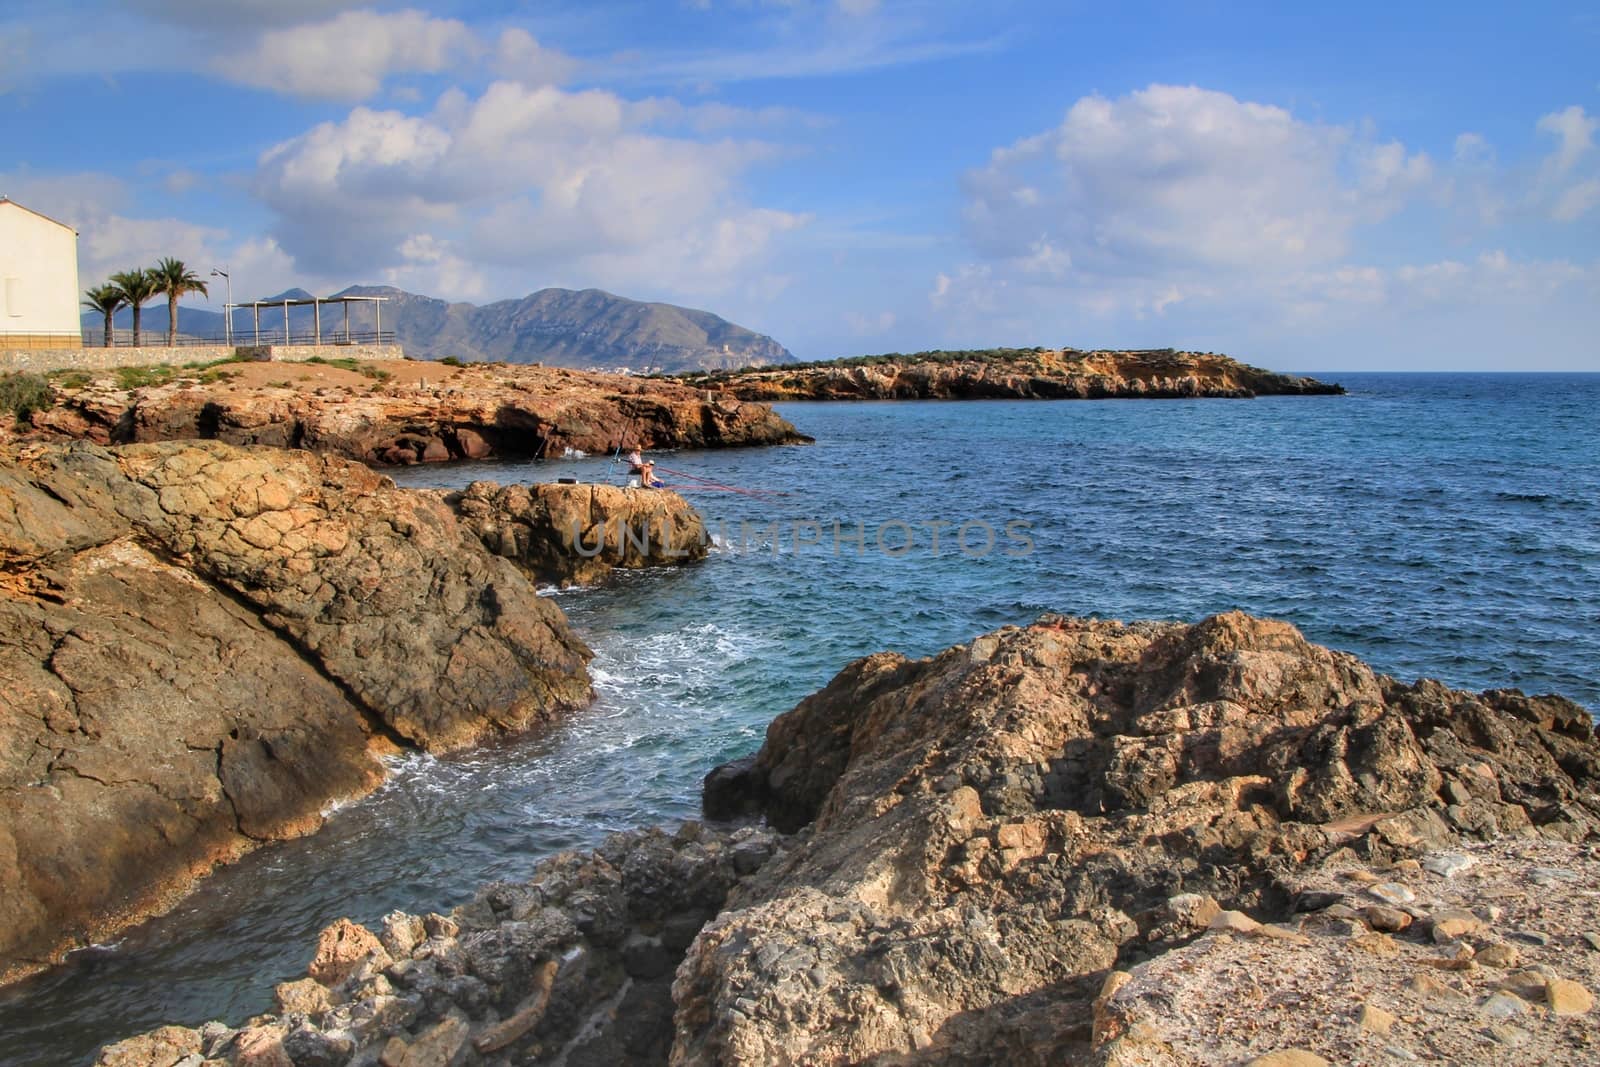 Isla Plana, Murcia, Spain- October 2, 2019: Fisherman and his wife fishing on the rocks in the evening on Isla Plana beach in a sunny day. Cartagena province, Murcia,Spain.